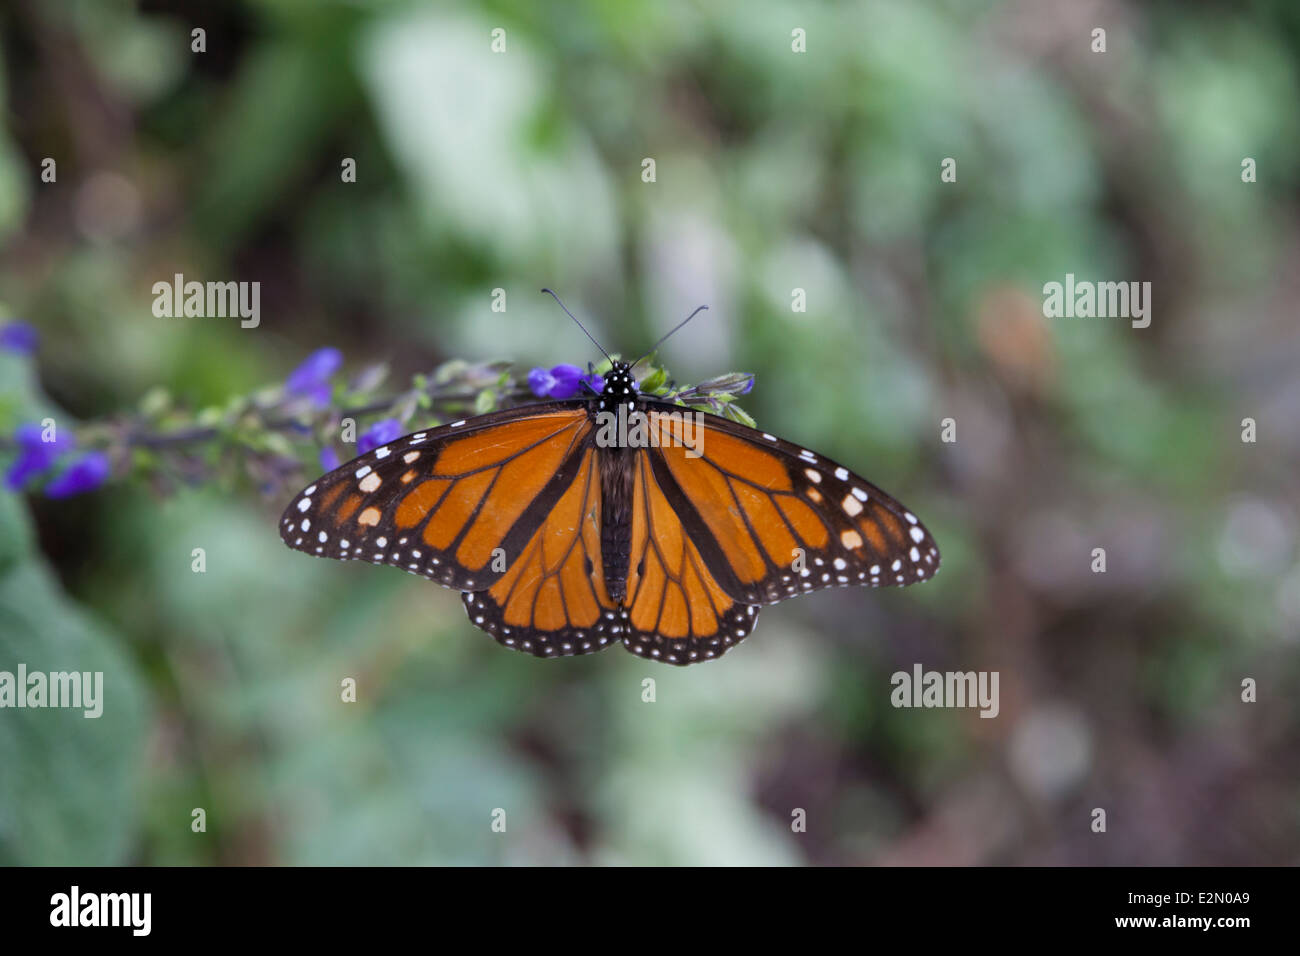 Monarch butterfly at the Monarch Butterfly Biosphere Reserve in Cerro Pelon - Donato Guerra, State of Mexico, Mexico Stock Photo